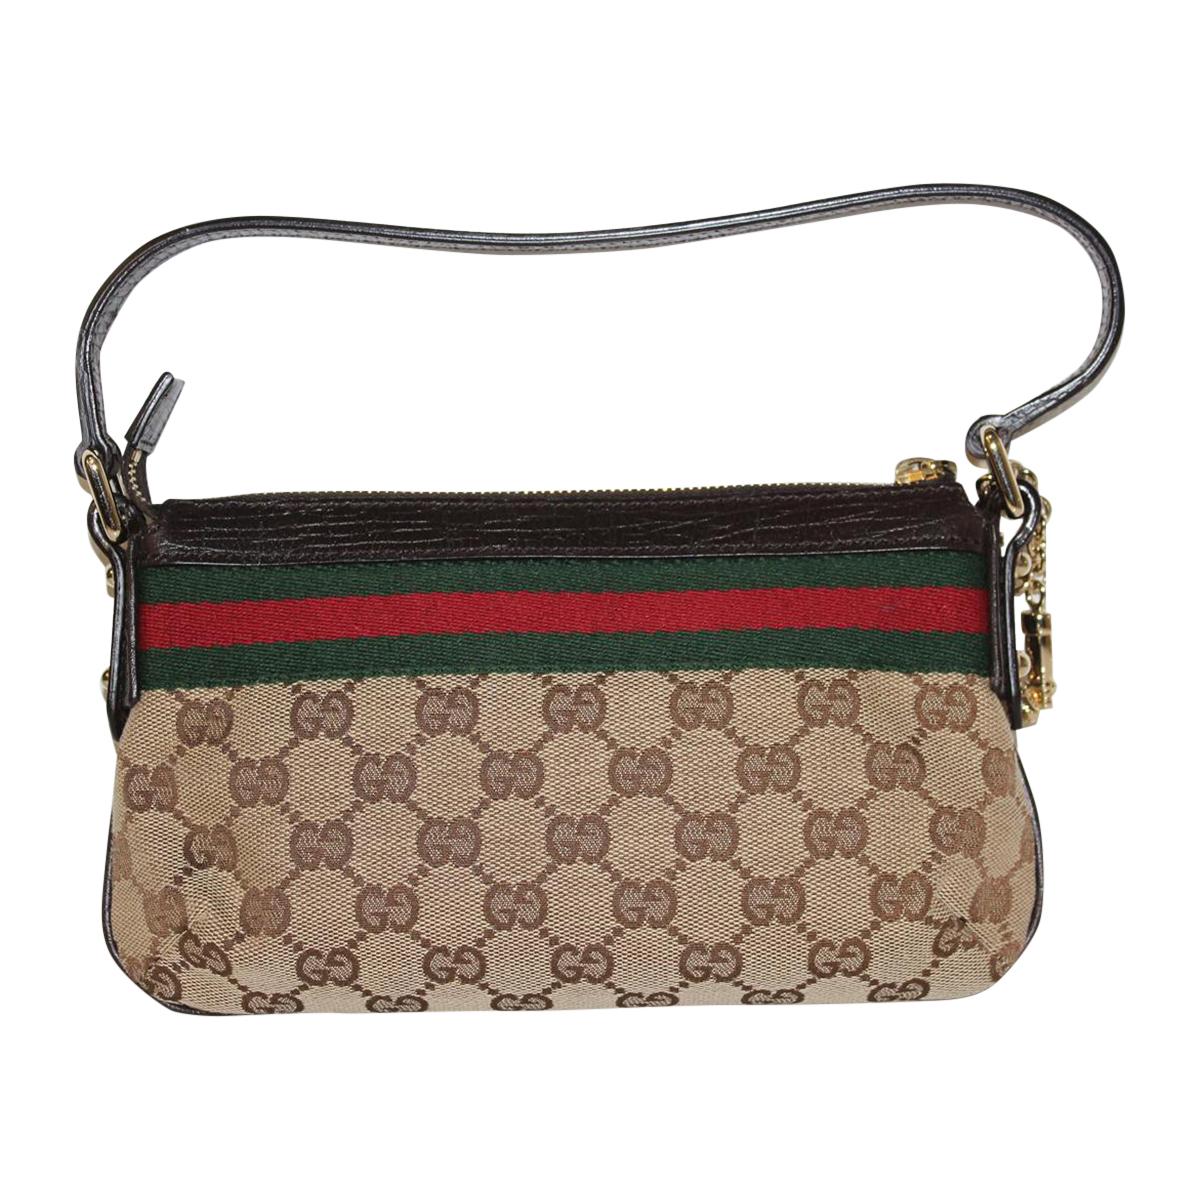 Iconic Gucci pochette
Leather and fabric
GG logo with green and red stripe
Zip closure
Two golden charms on one side
One internal pocket
Cm 23 x 14 x 4 (9.05 x 5.51 x 1.57 inches)
Worldwide express shipping included in the price !